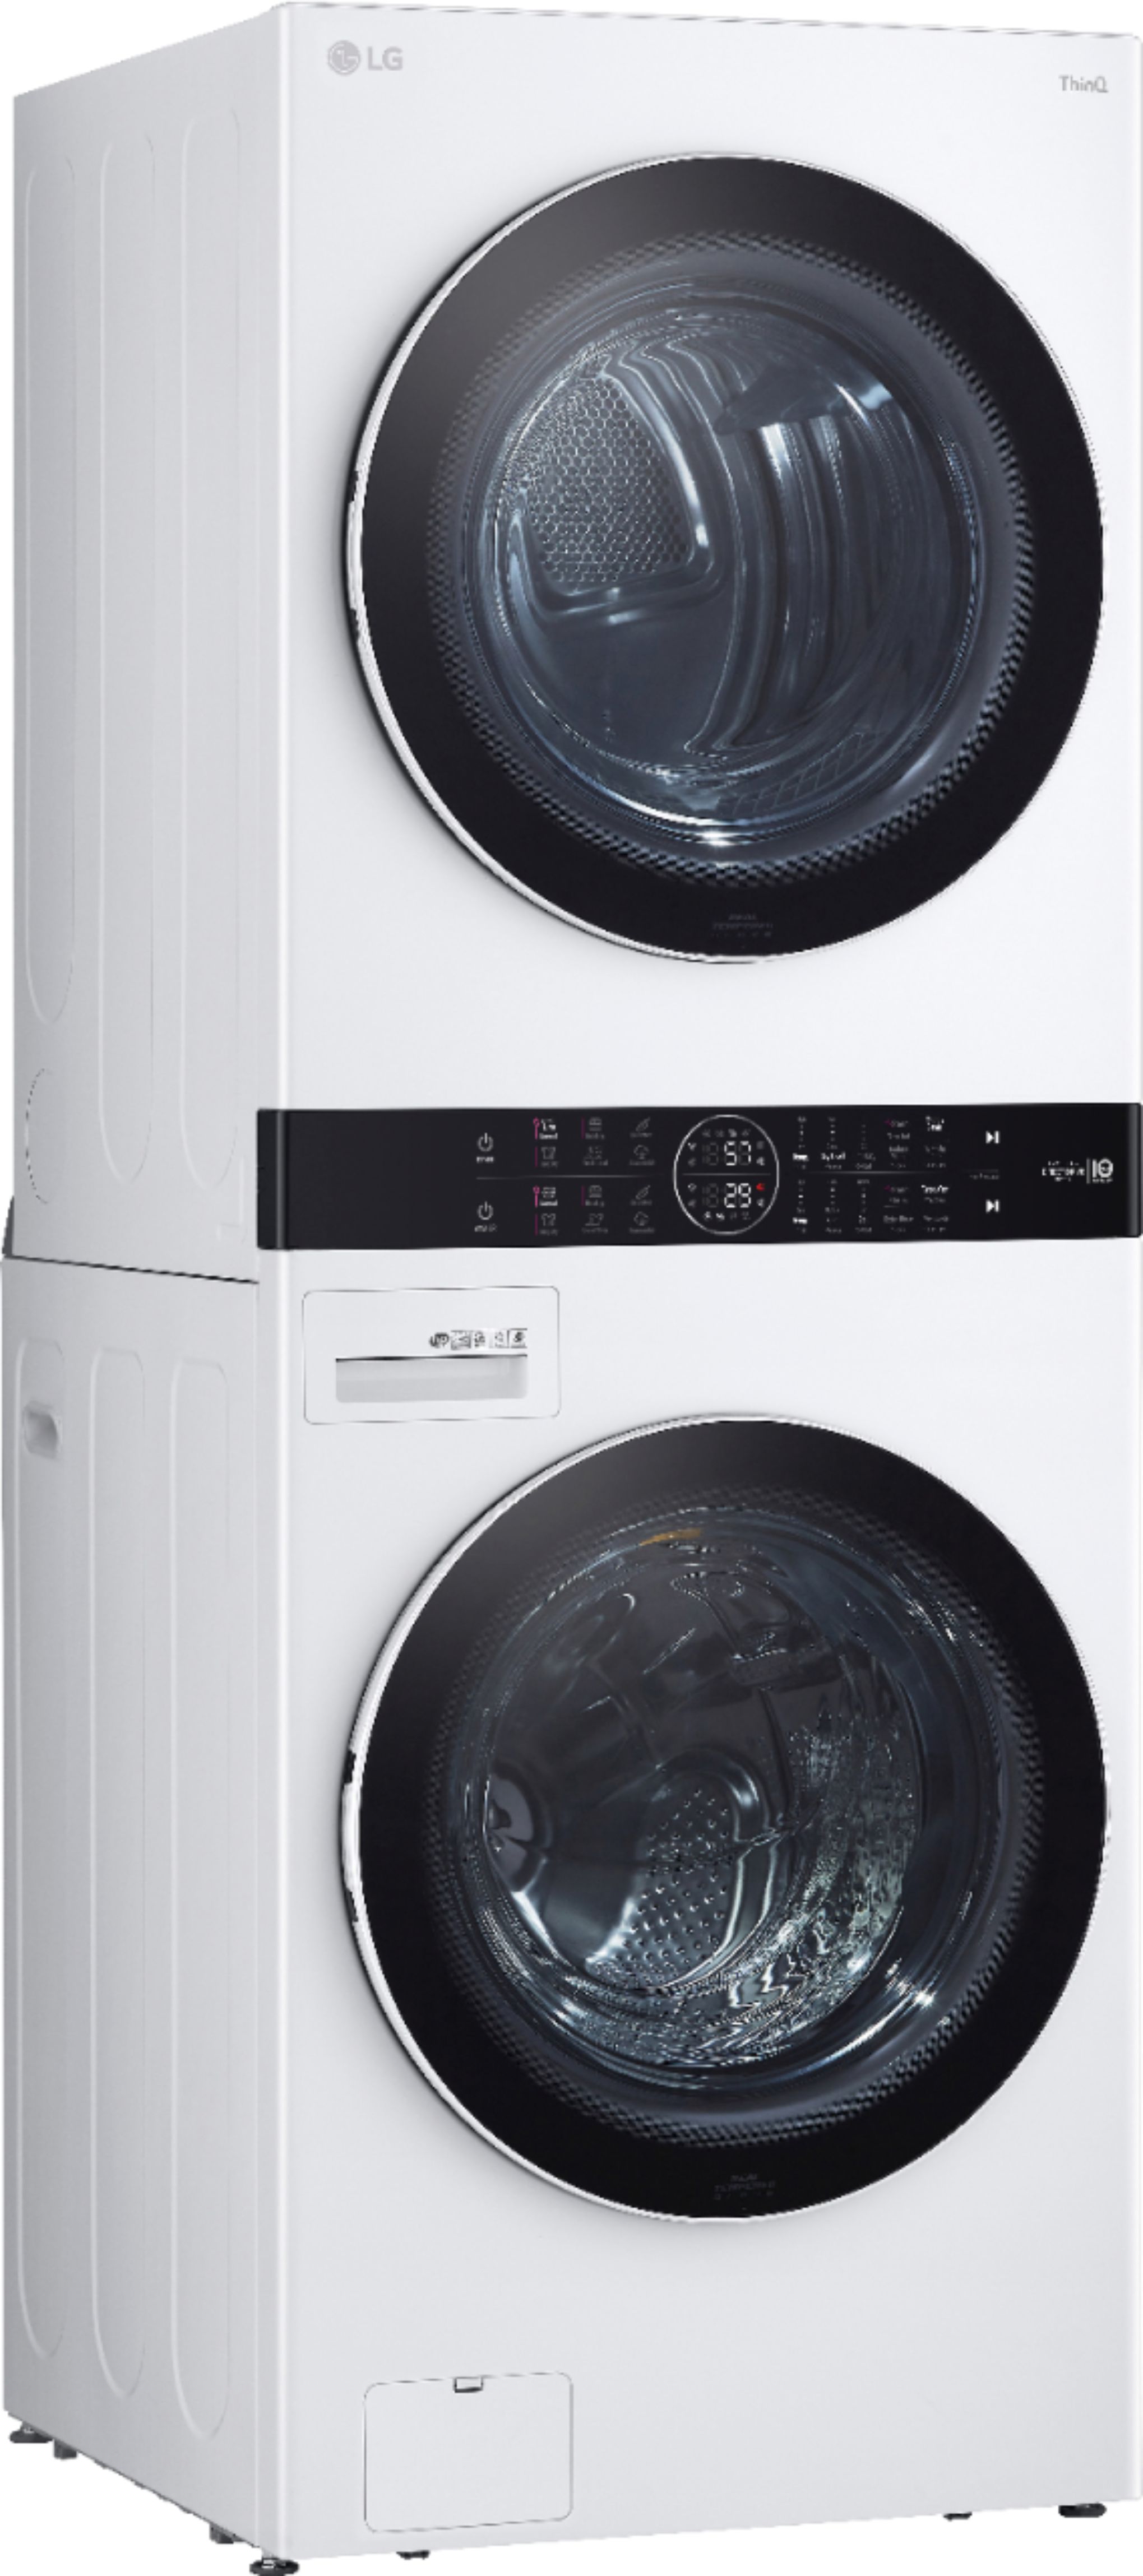 Angle View: LG - 4.5 Cu. Ft. HE Smart Front Load Washer and 7.4 Cu. Ft. Electric Dryer WashTower with Steam and Built-In Intelligence - White